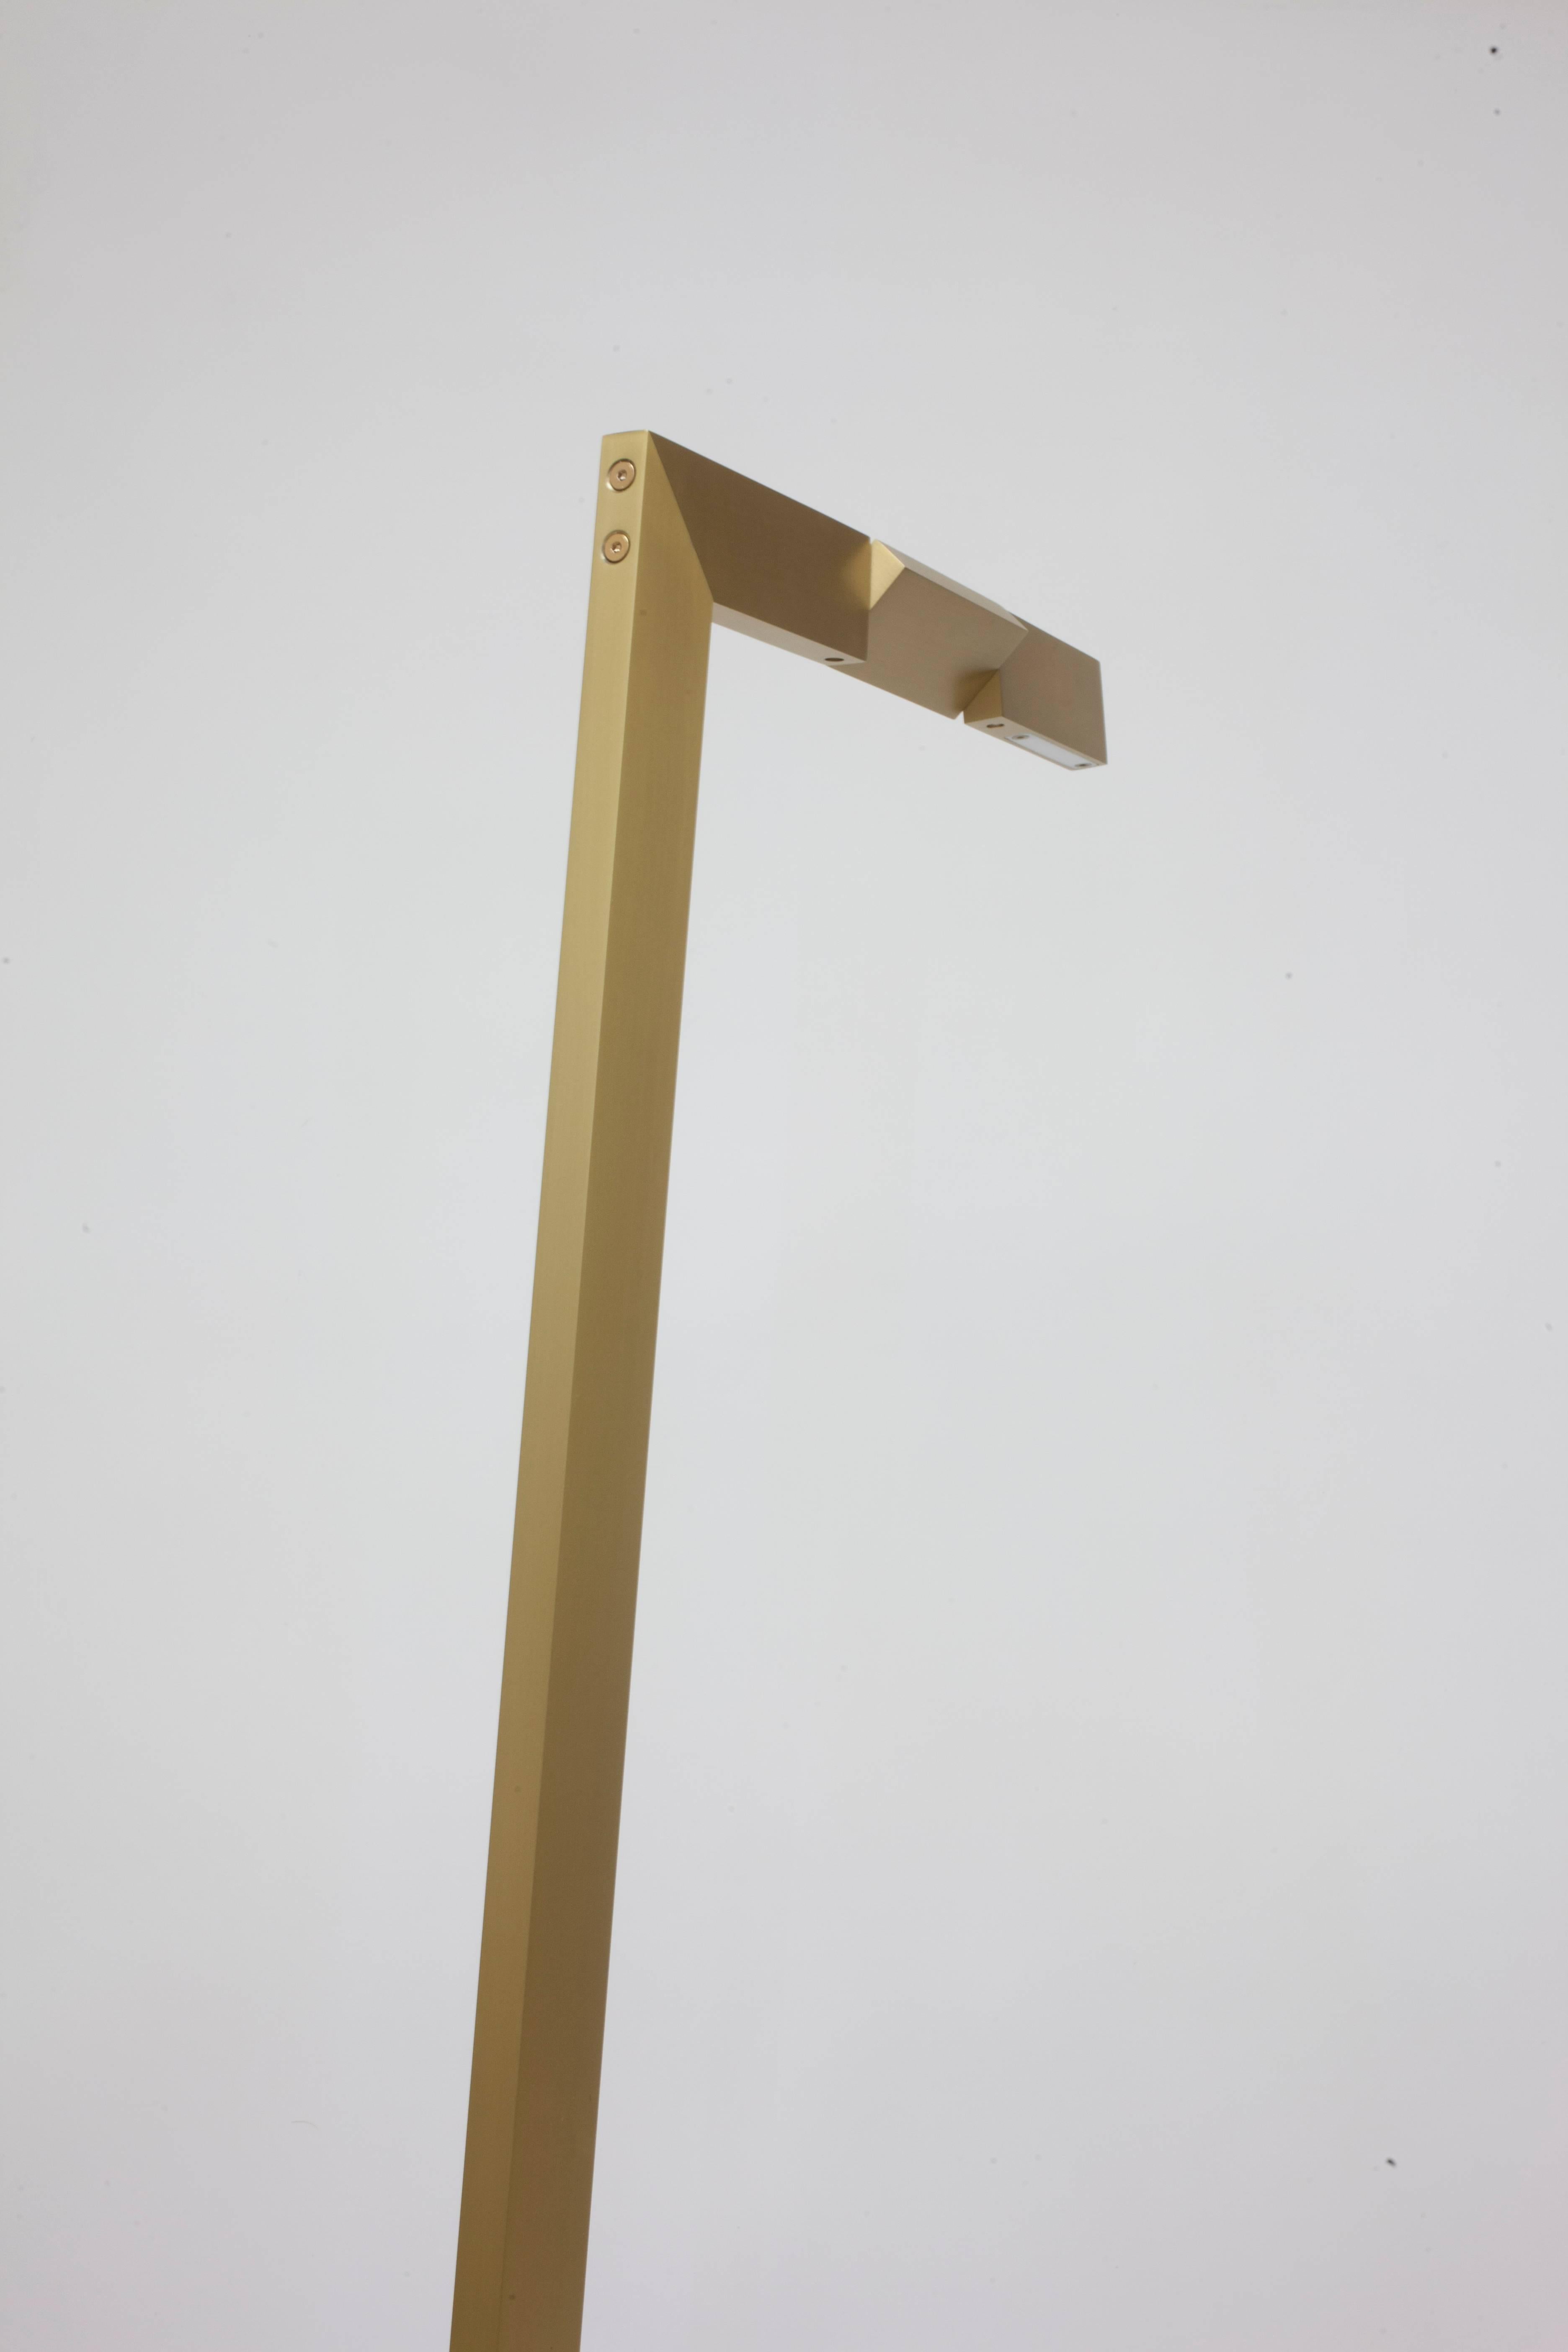 Minimalist Contemporary Lido Floor Lamp 001 in Brass by Orphan Work For Sale